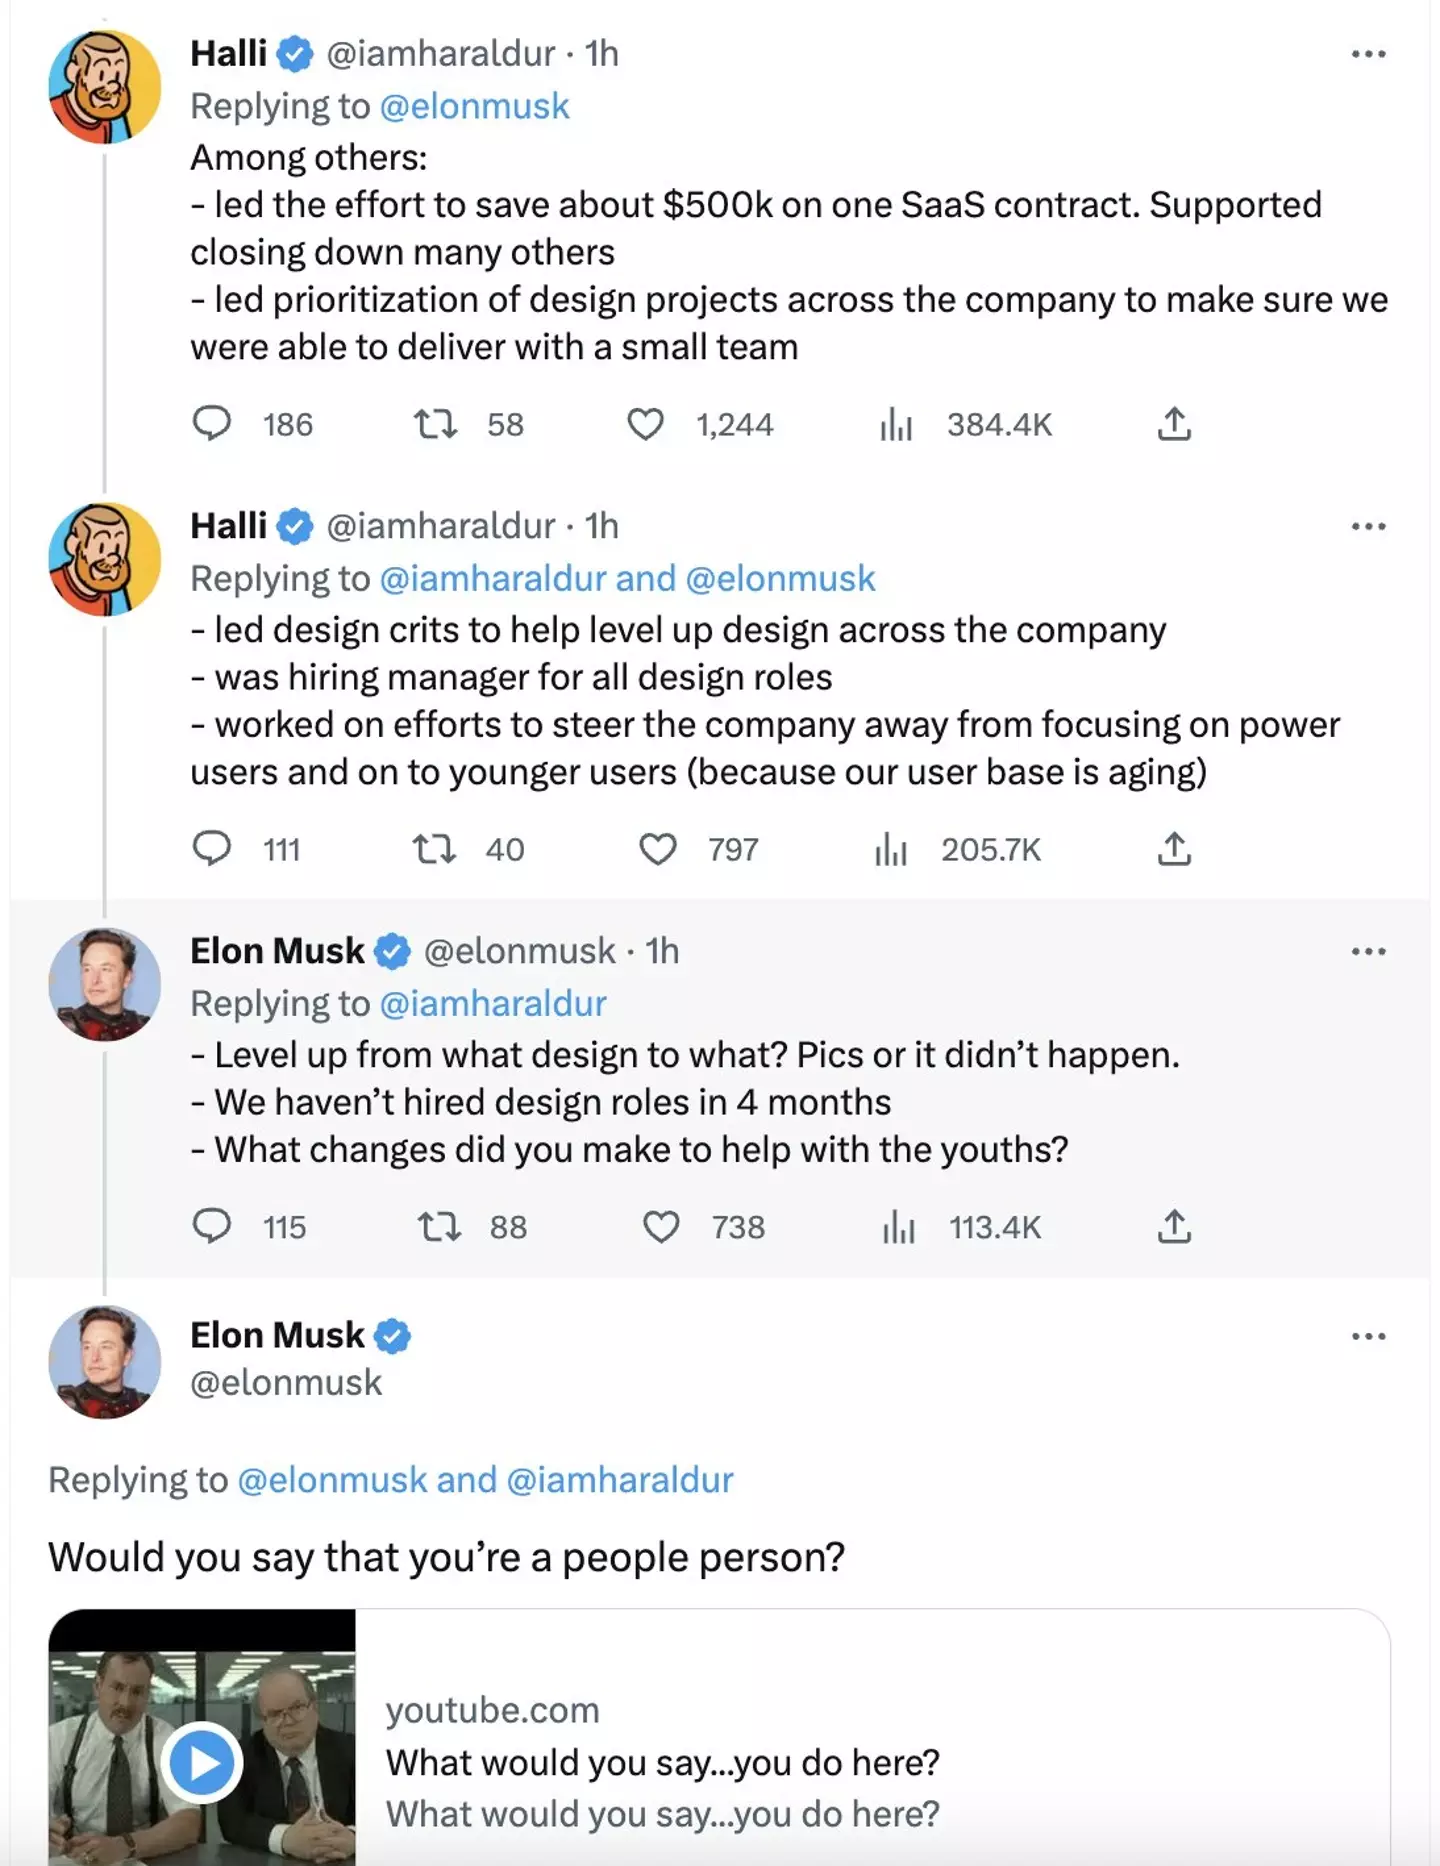 Musk unexpectedly hit back at Thorleifsson, revealing that Twitter hasn't 'hired design roles in 4 months'.